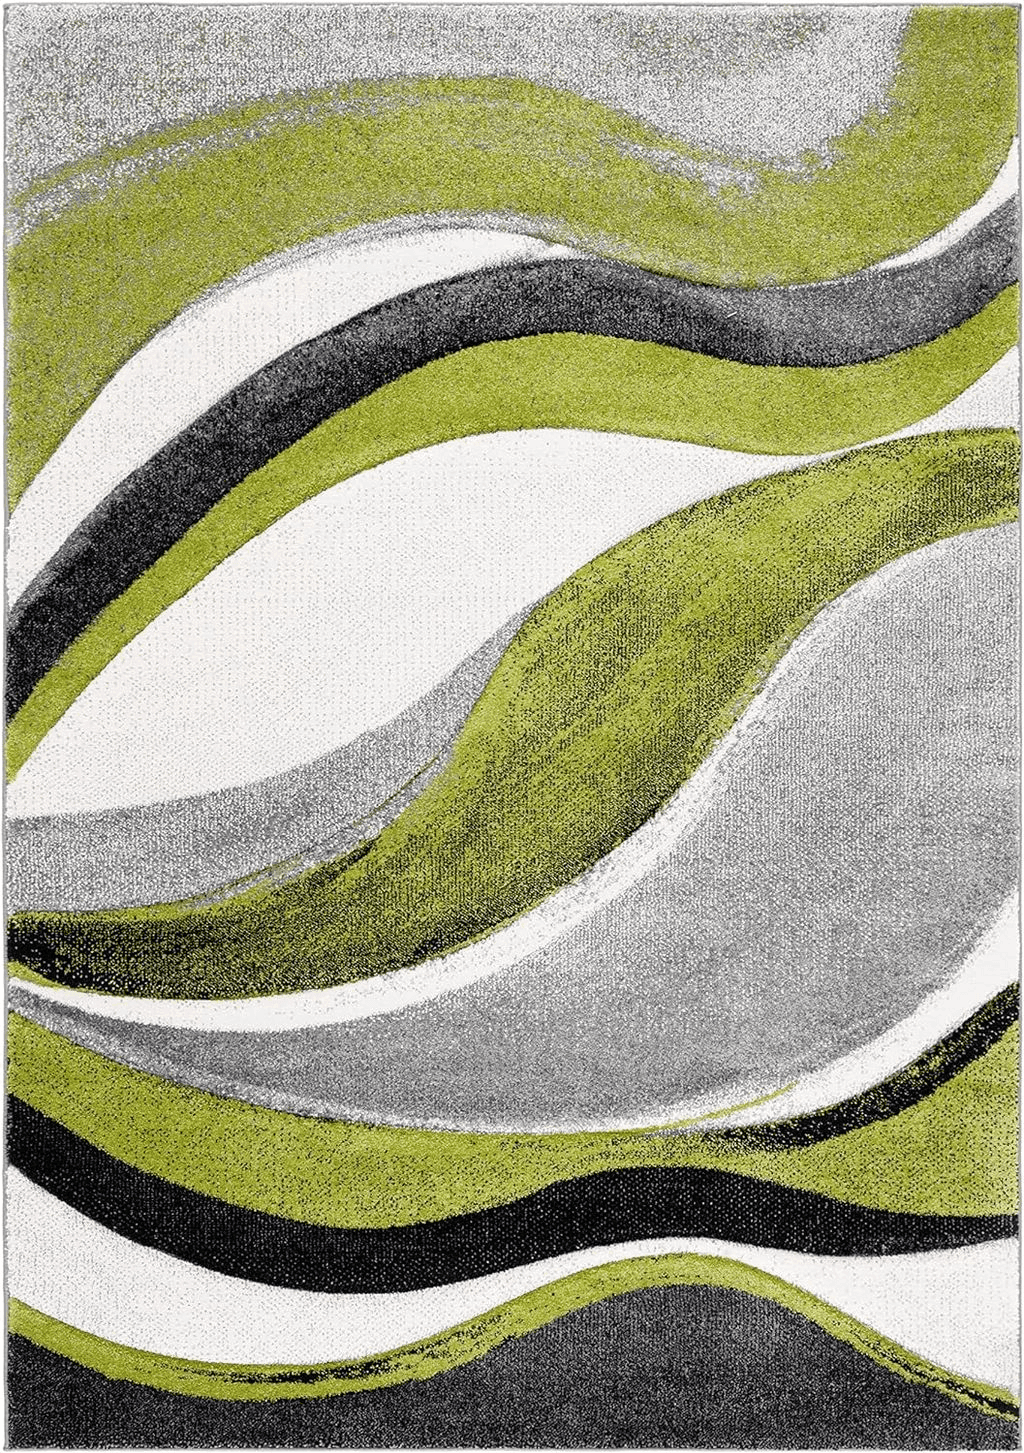 Safavieh Hollywood Collection Area Rug - 6'7" x 9', Grey & Green, Mid-Century Modern Abstract Design, Non-Shedding & Easy Care, Ideal for High Traffic Areas in Living Room, Bedroom (HLW766Y)